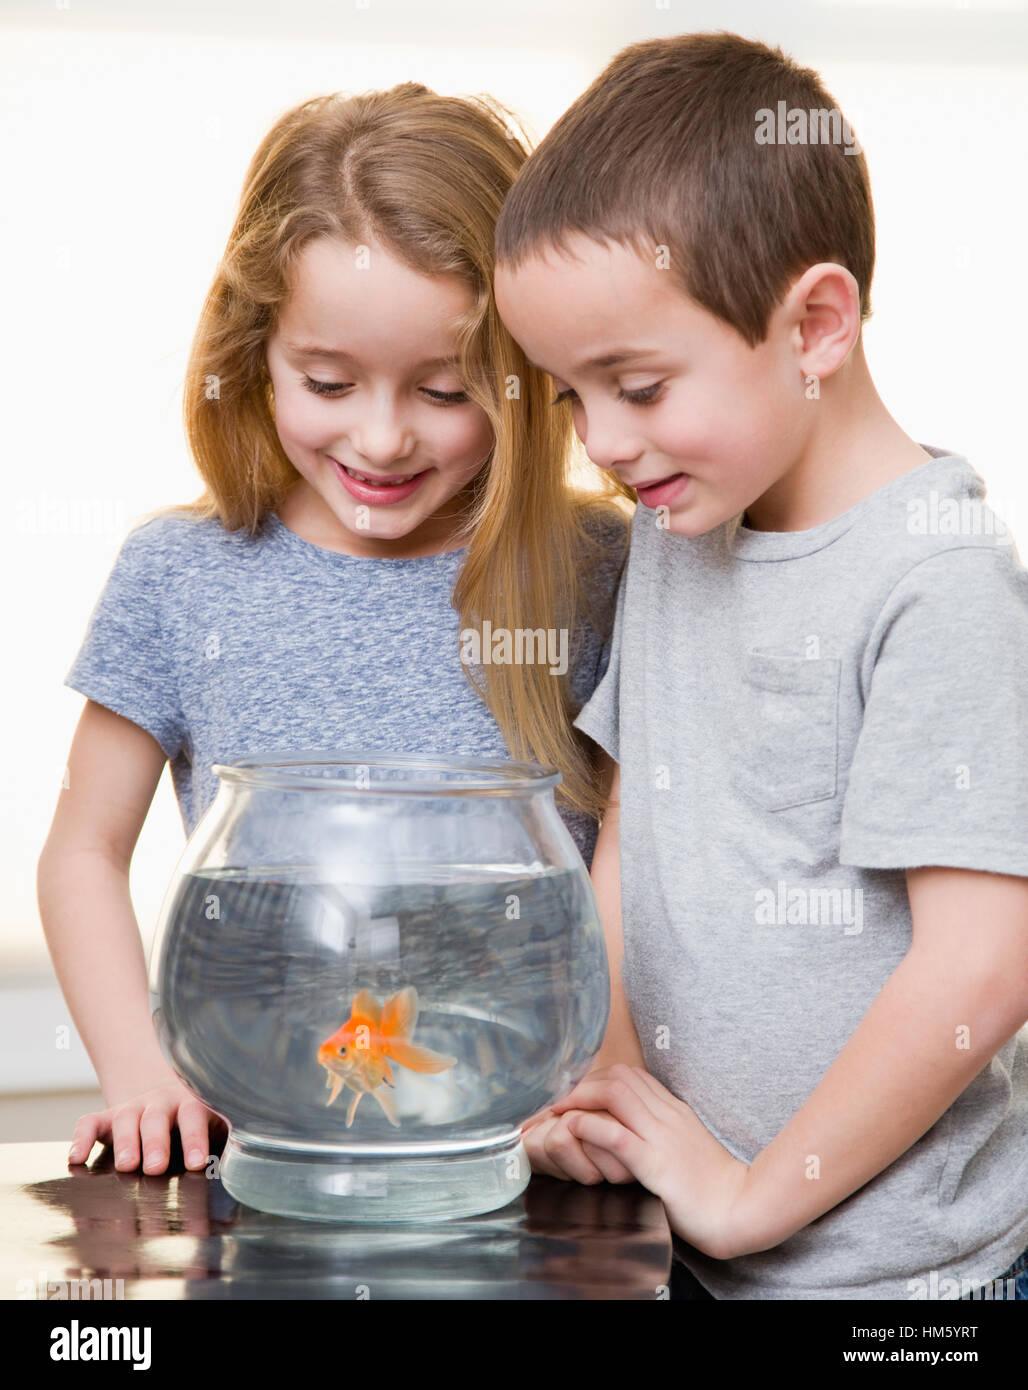 Boy (6-7) and girl (6-7) looking at goldfish in fishbowl Stock Photo